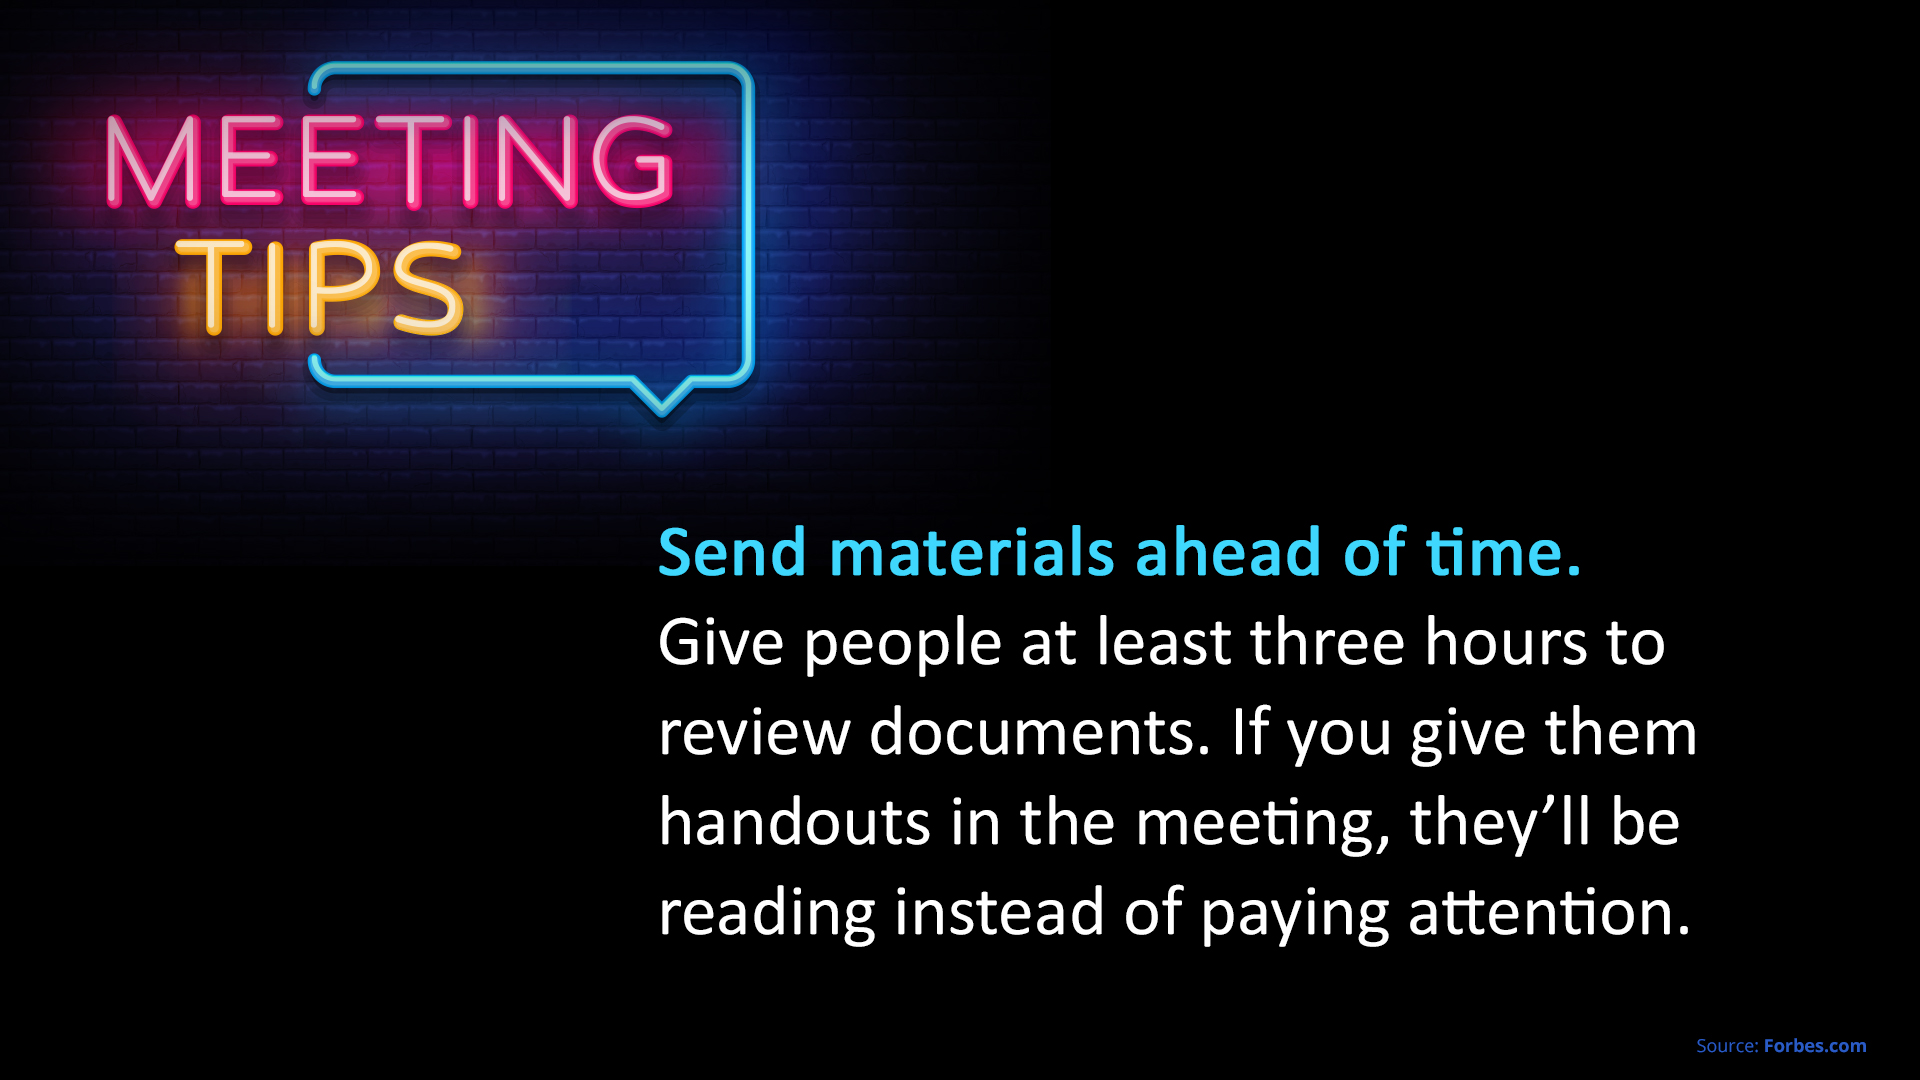 Free Graphic | Meeting Tips | Send materials ahead of time